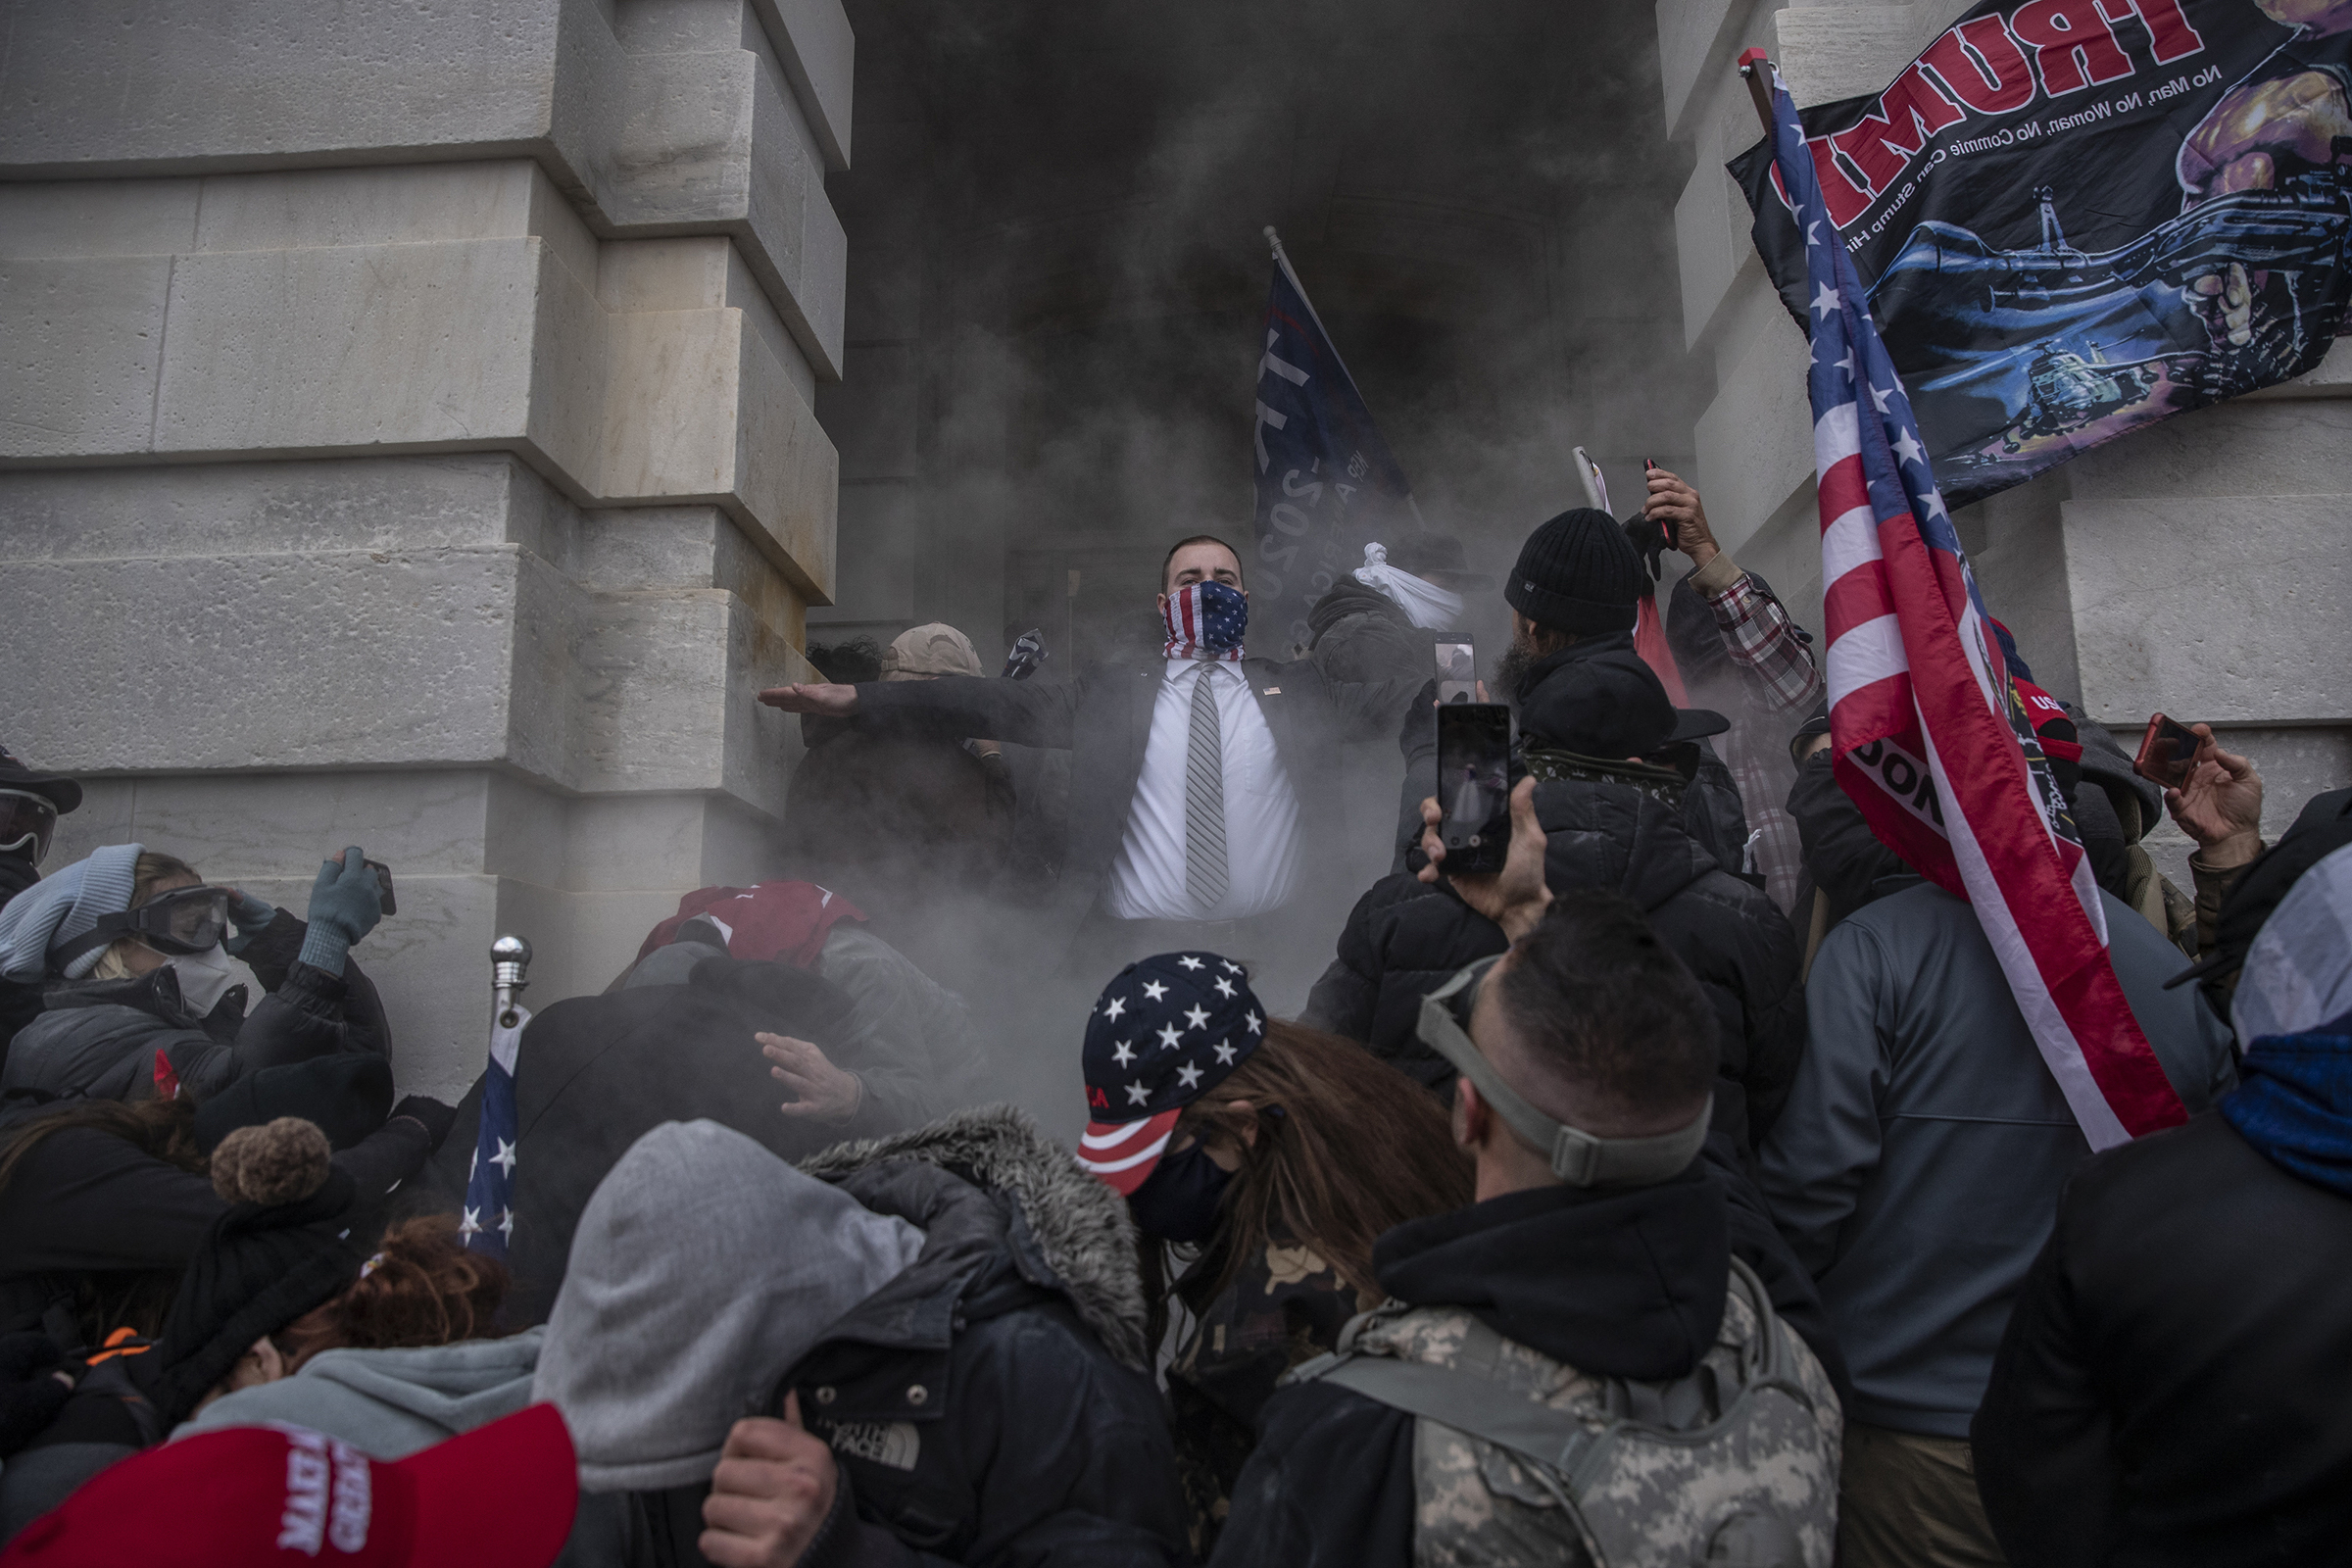 A mob breaches the U.S. Capitol building in Washington, D.C., on Jan. 6. The attack two weeks before the end of President Donald Trump's term resulted in his second impeachment, a week later, by the House for 